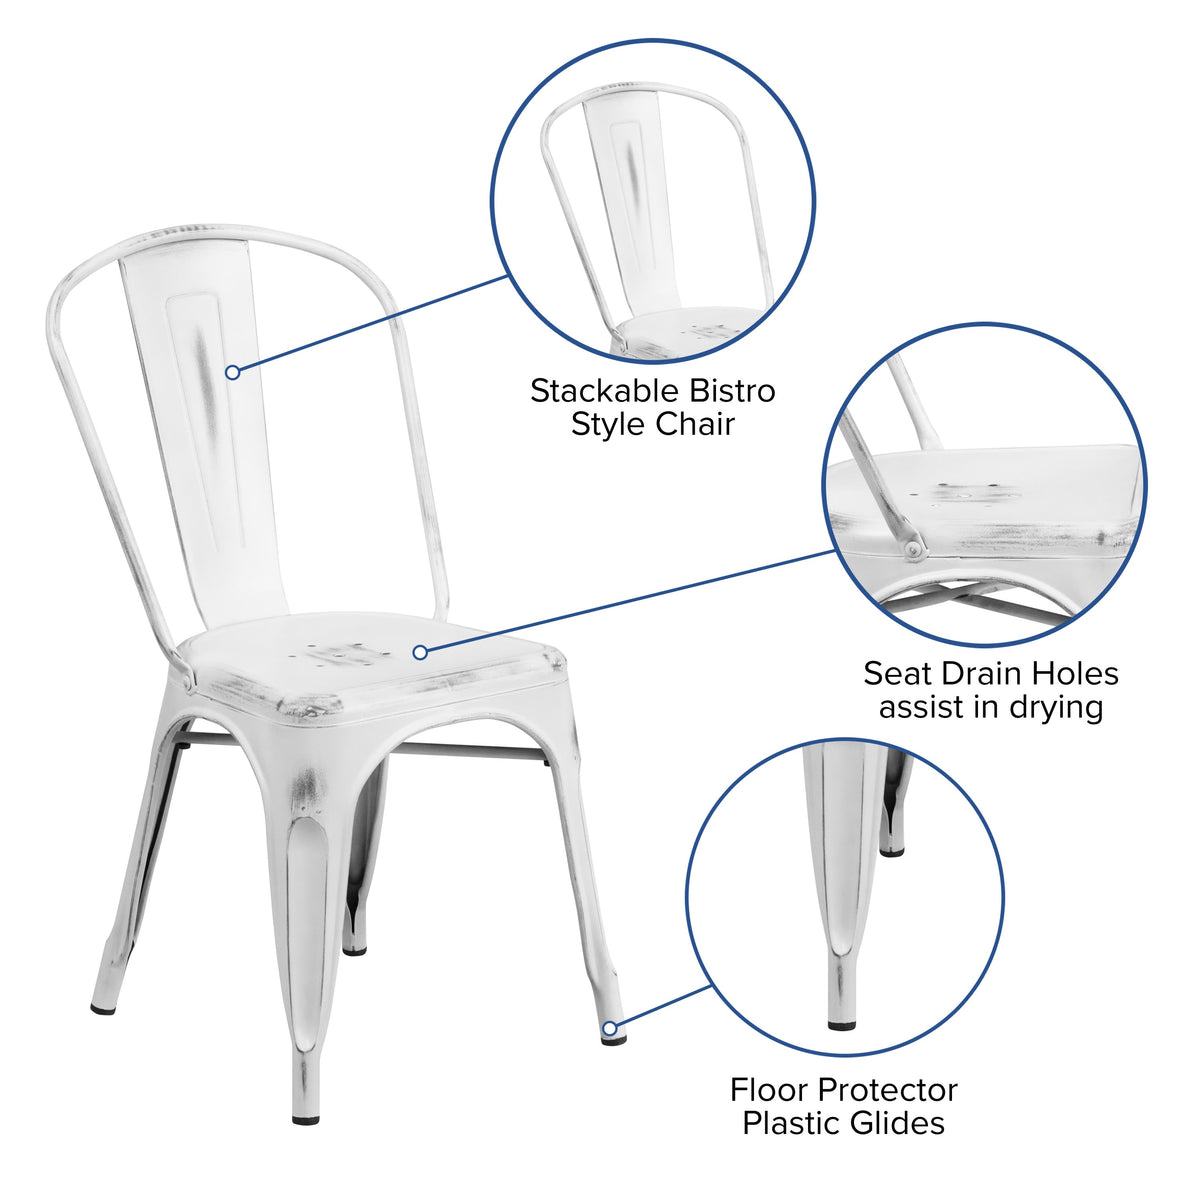 White |#| Distressed White Metal Indoor-Outdoor Stackable Chair - Kitchen Furniture